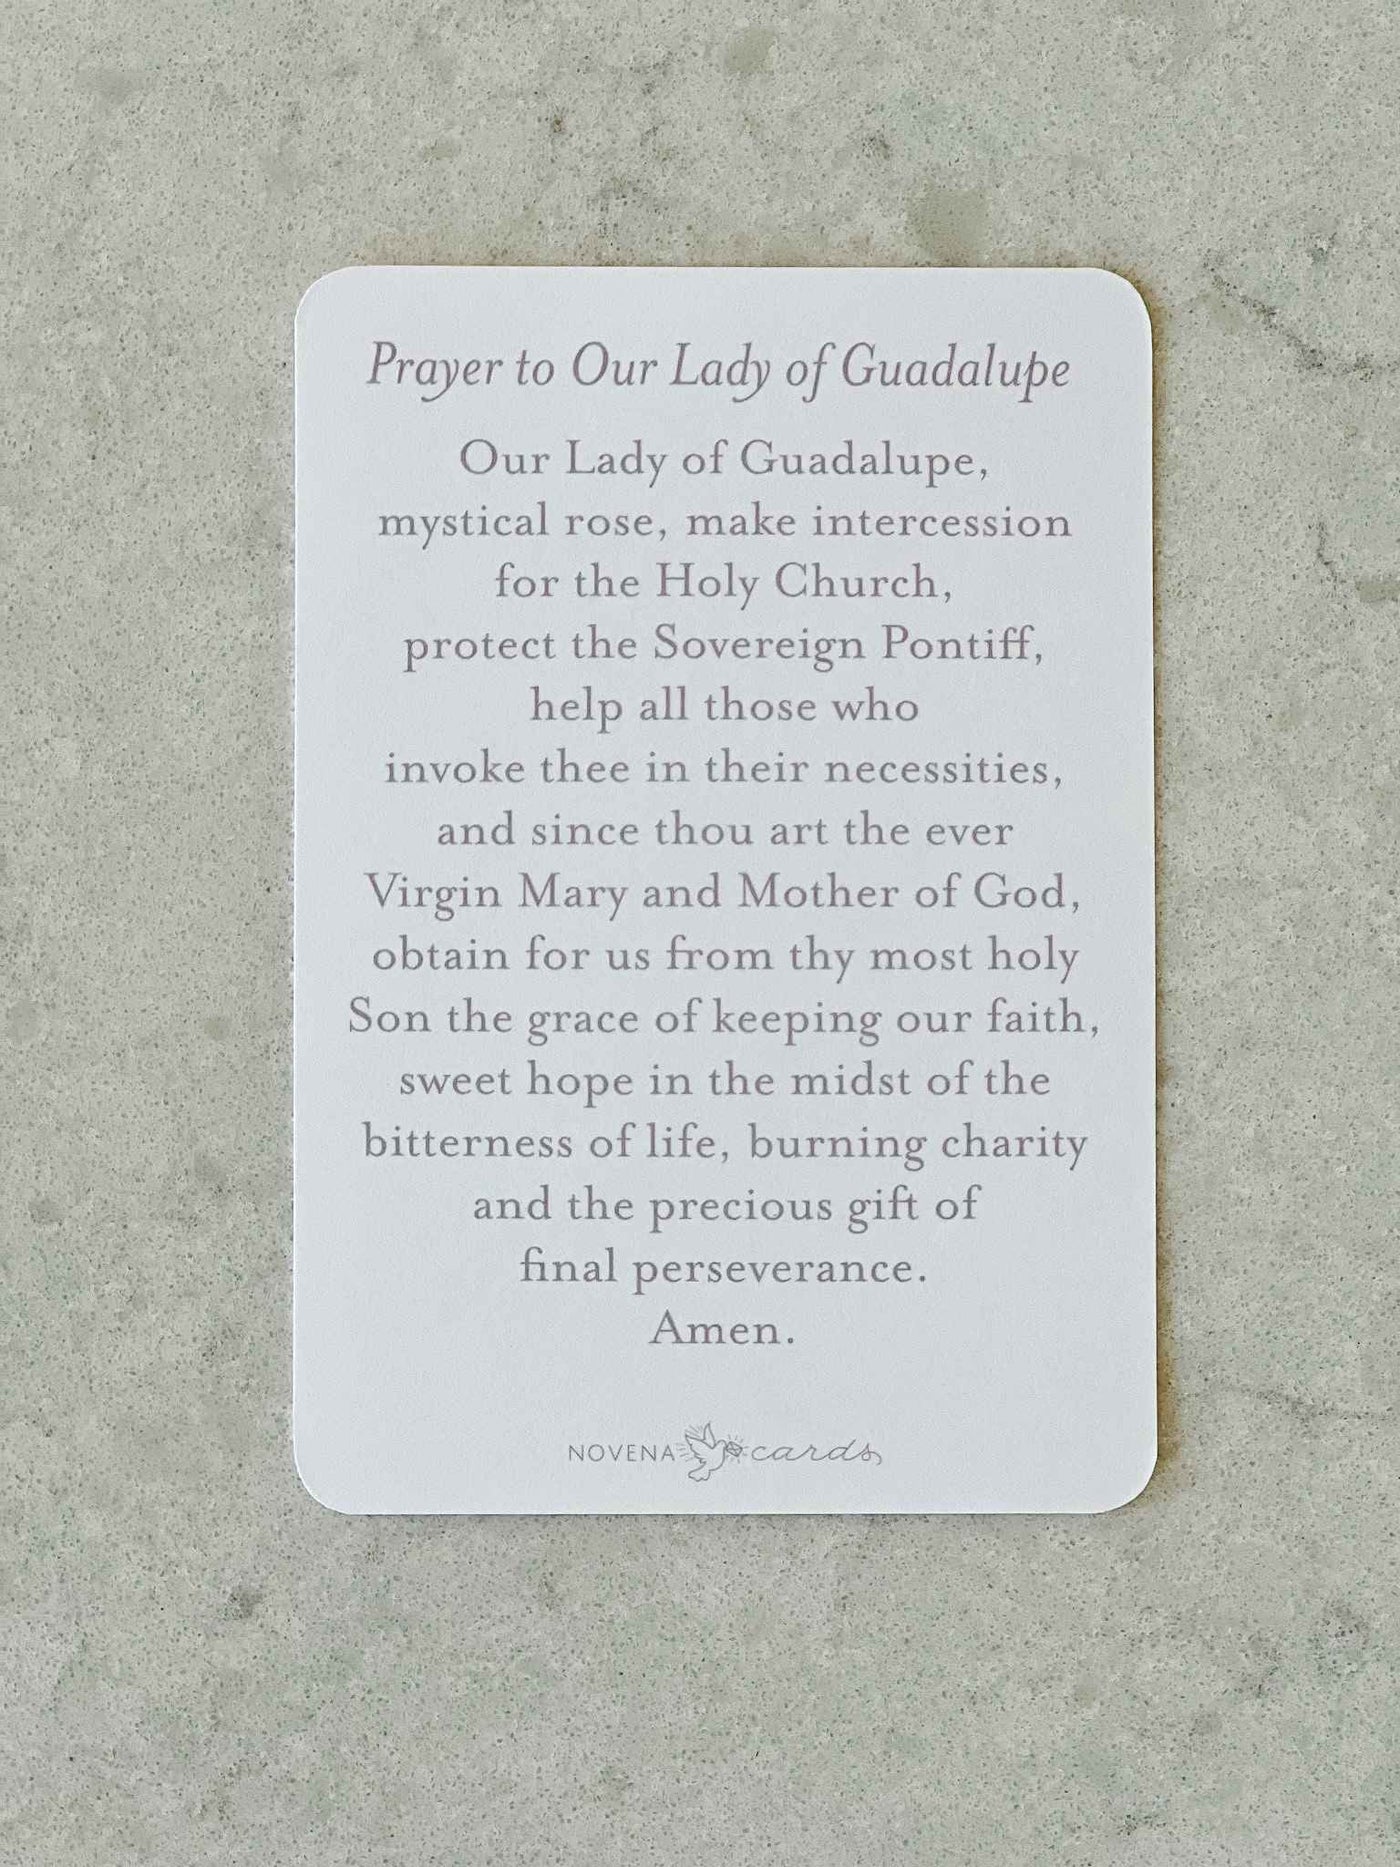 Our Lady of Guadalupe - Prayer Card